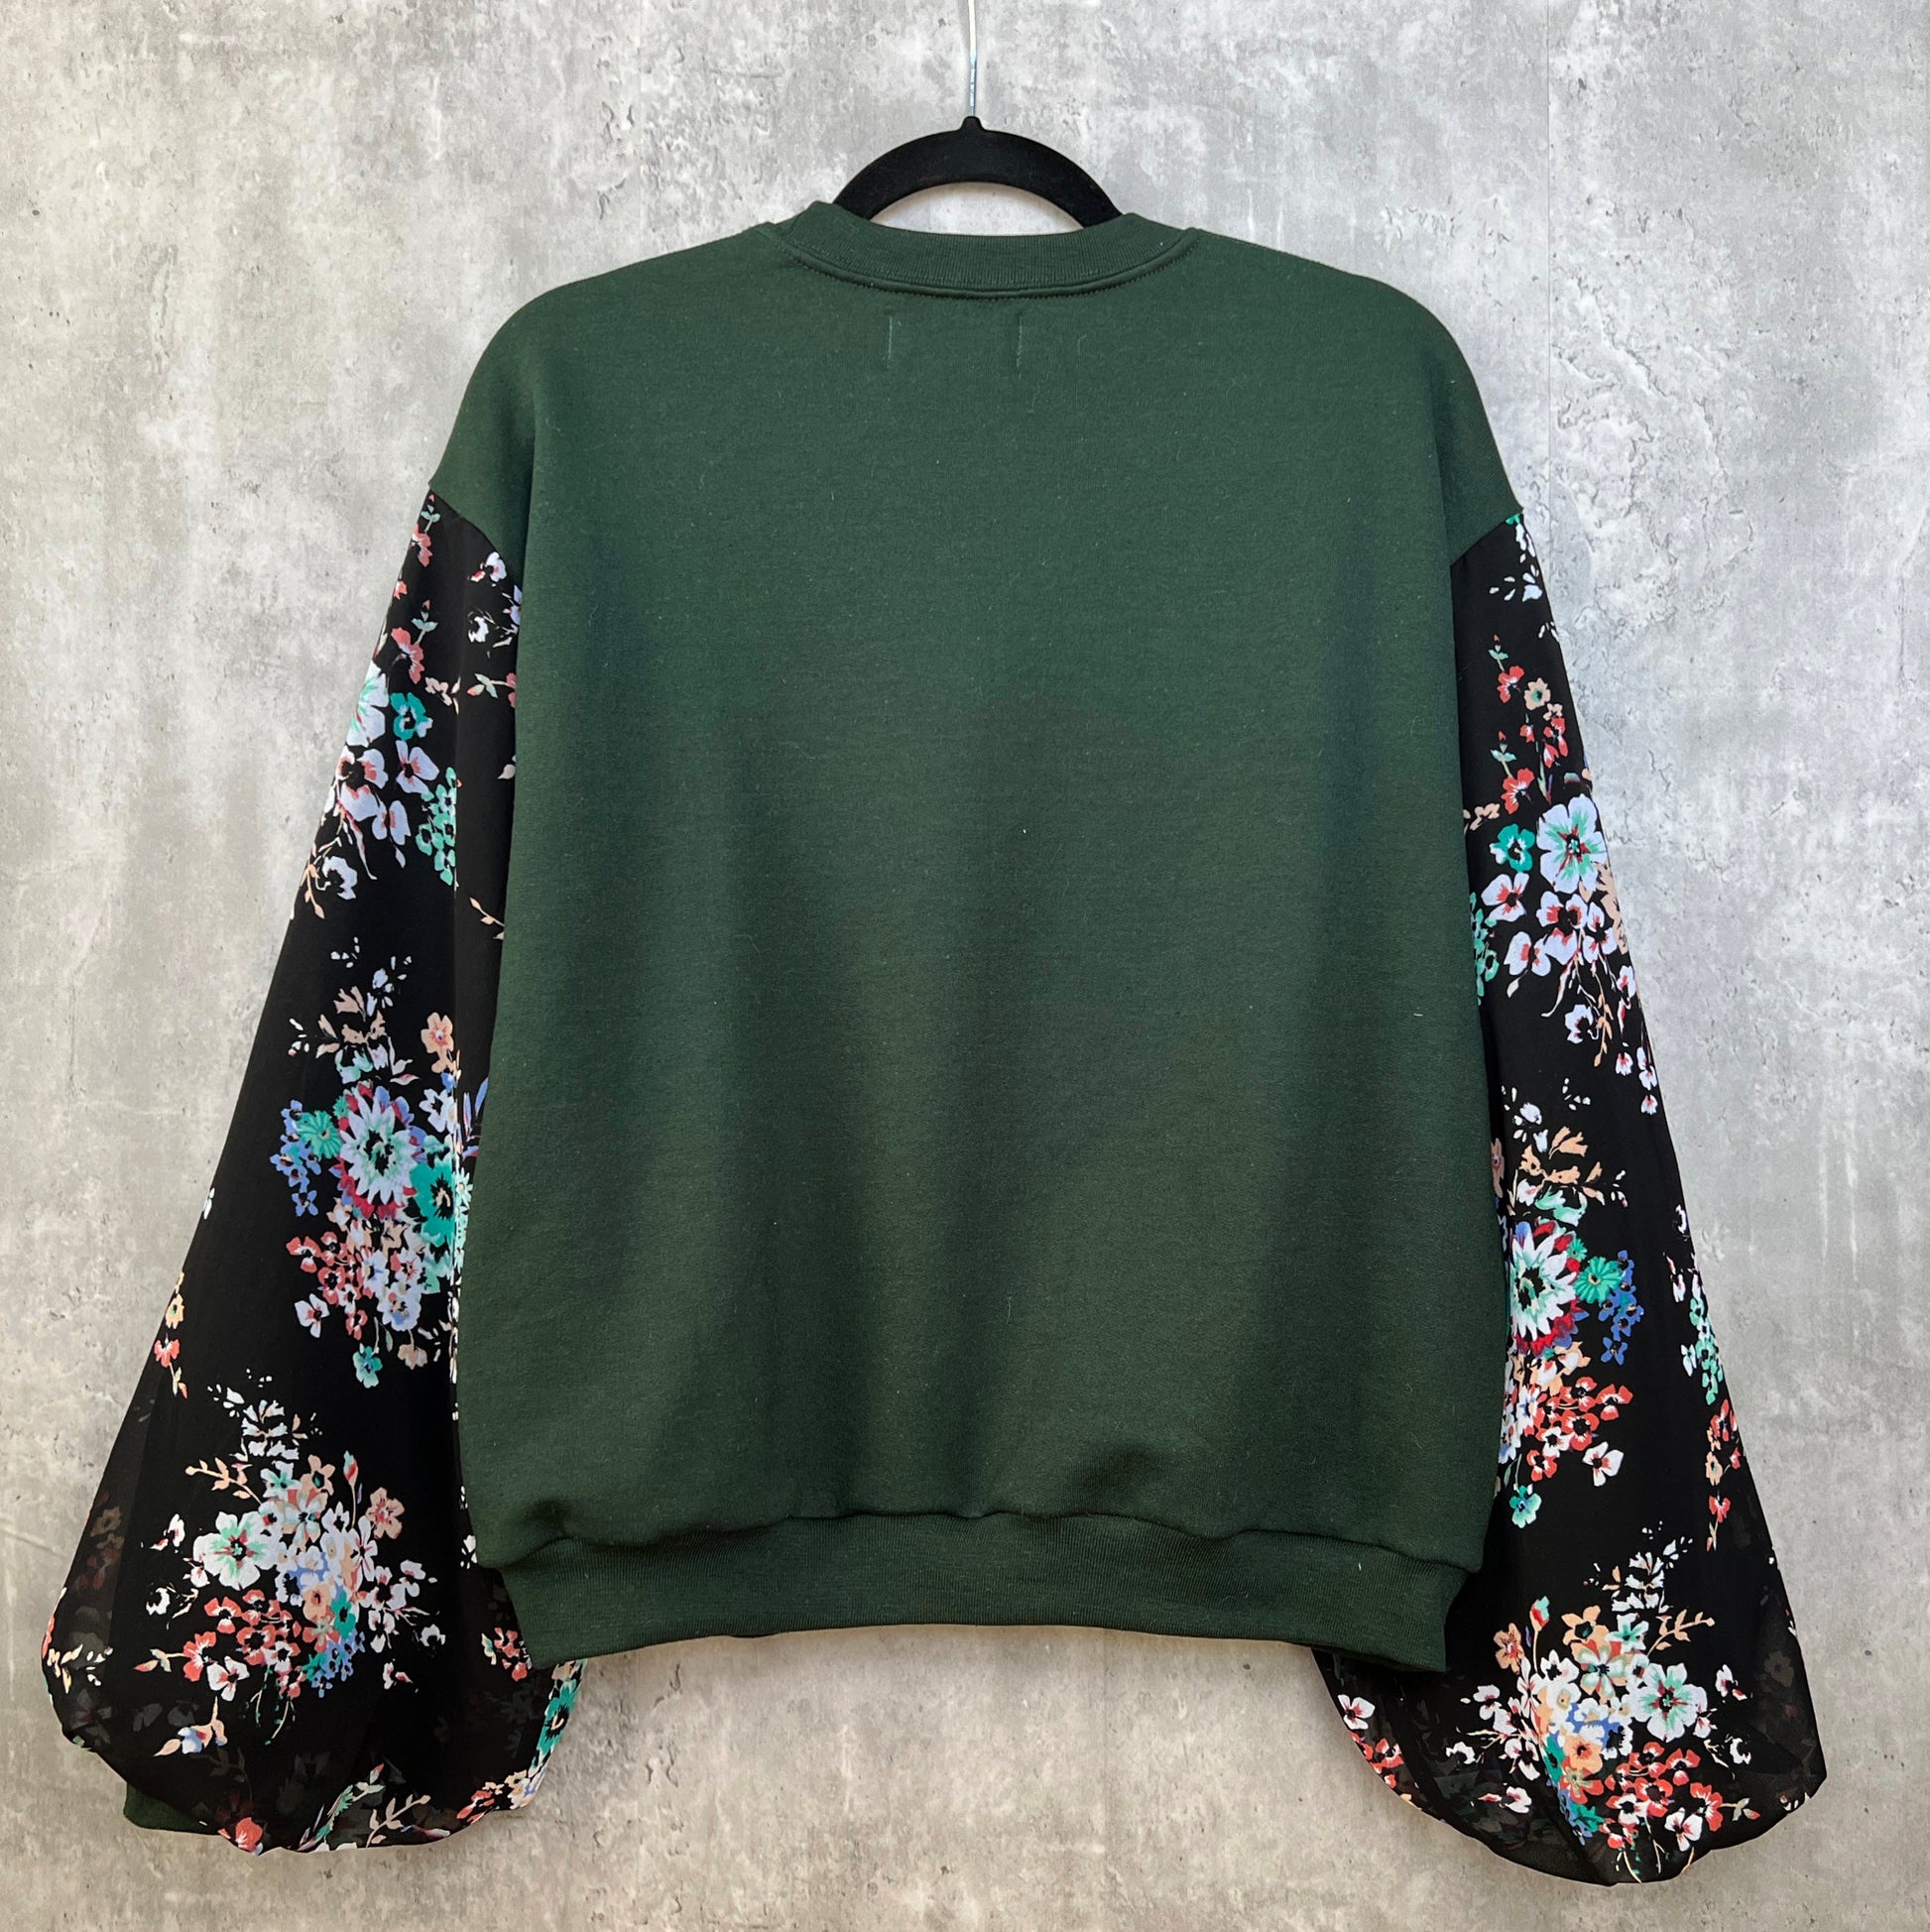 Back view of dark forest emerald green sweatshirt on hanger in front of cement gray background. Sweatshirt has puff sleeves with black base colorful floral. 